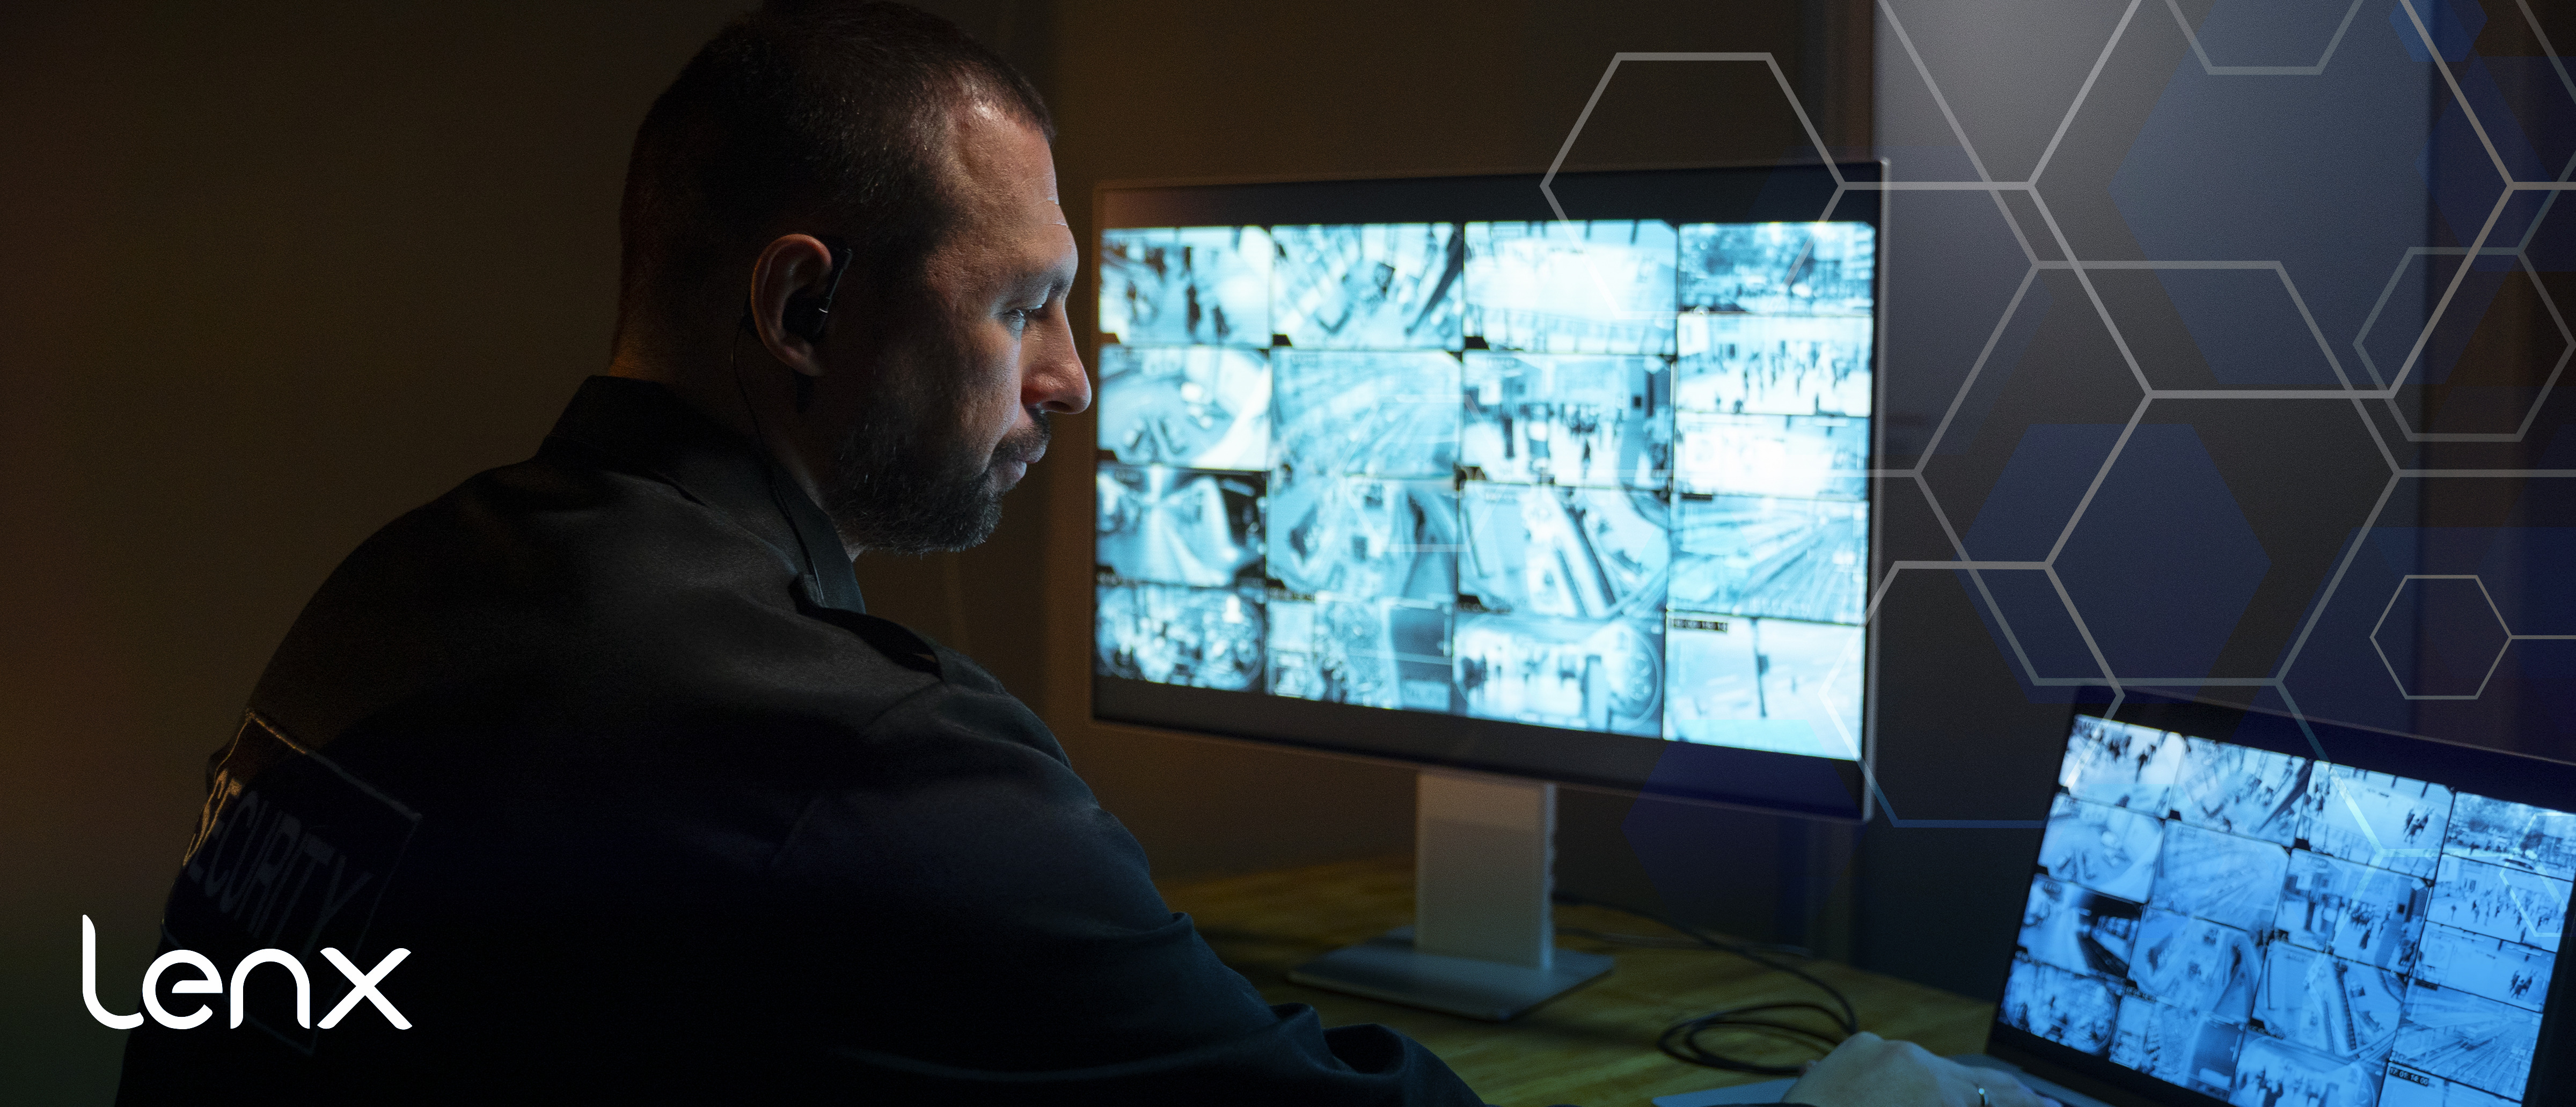 Making Sure AI Security, Active Shooter Detection Systems Can Be Used With Your Camera System